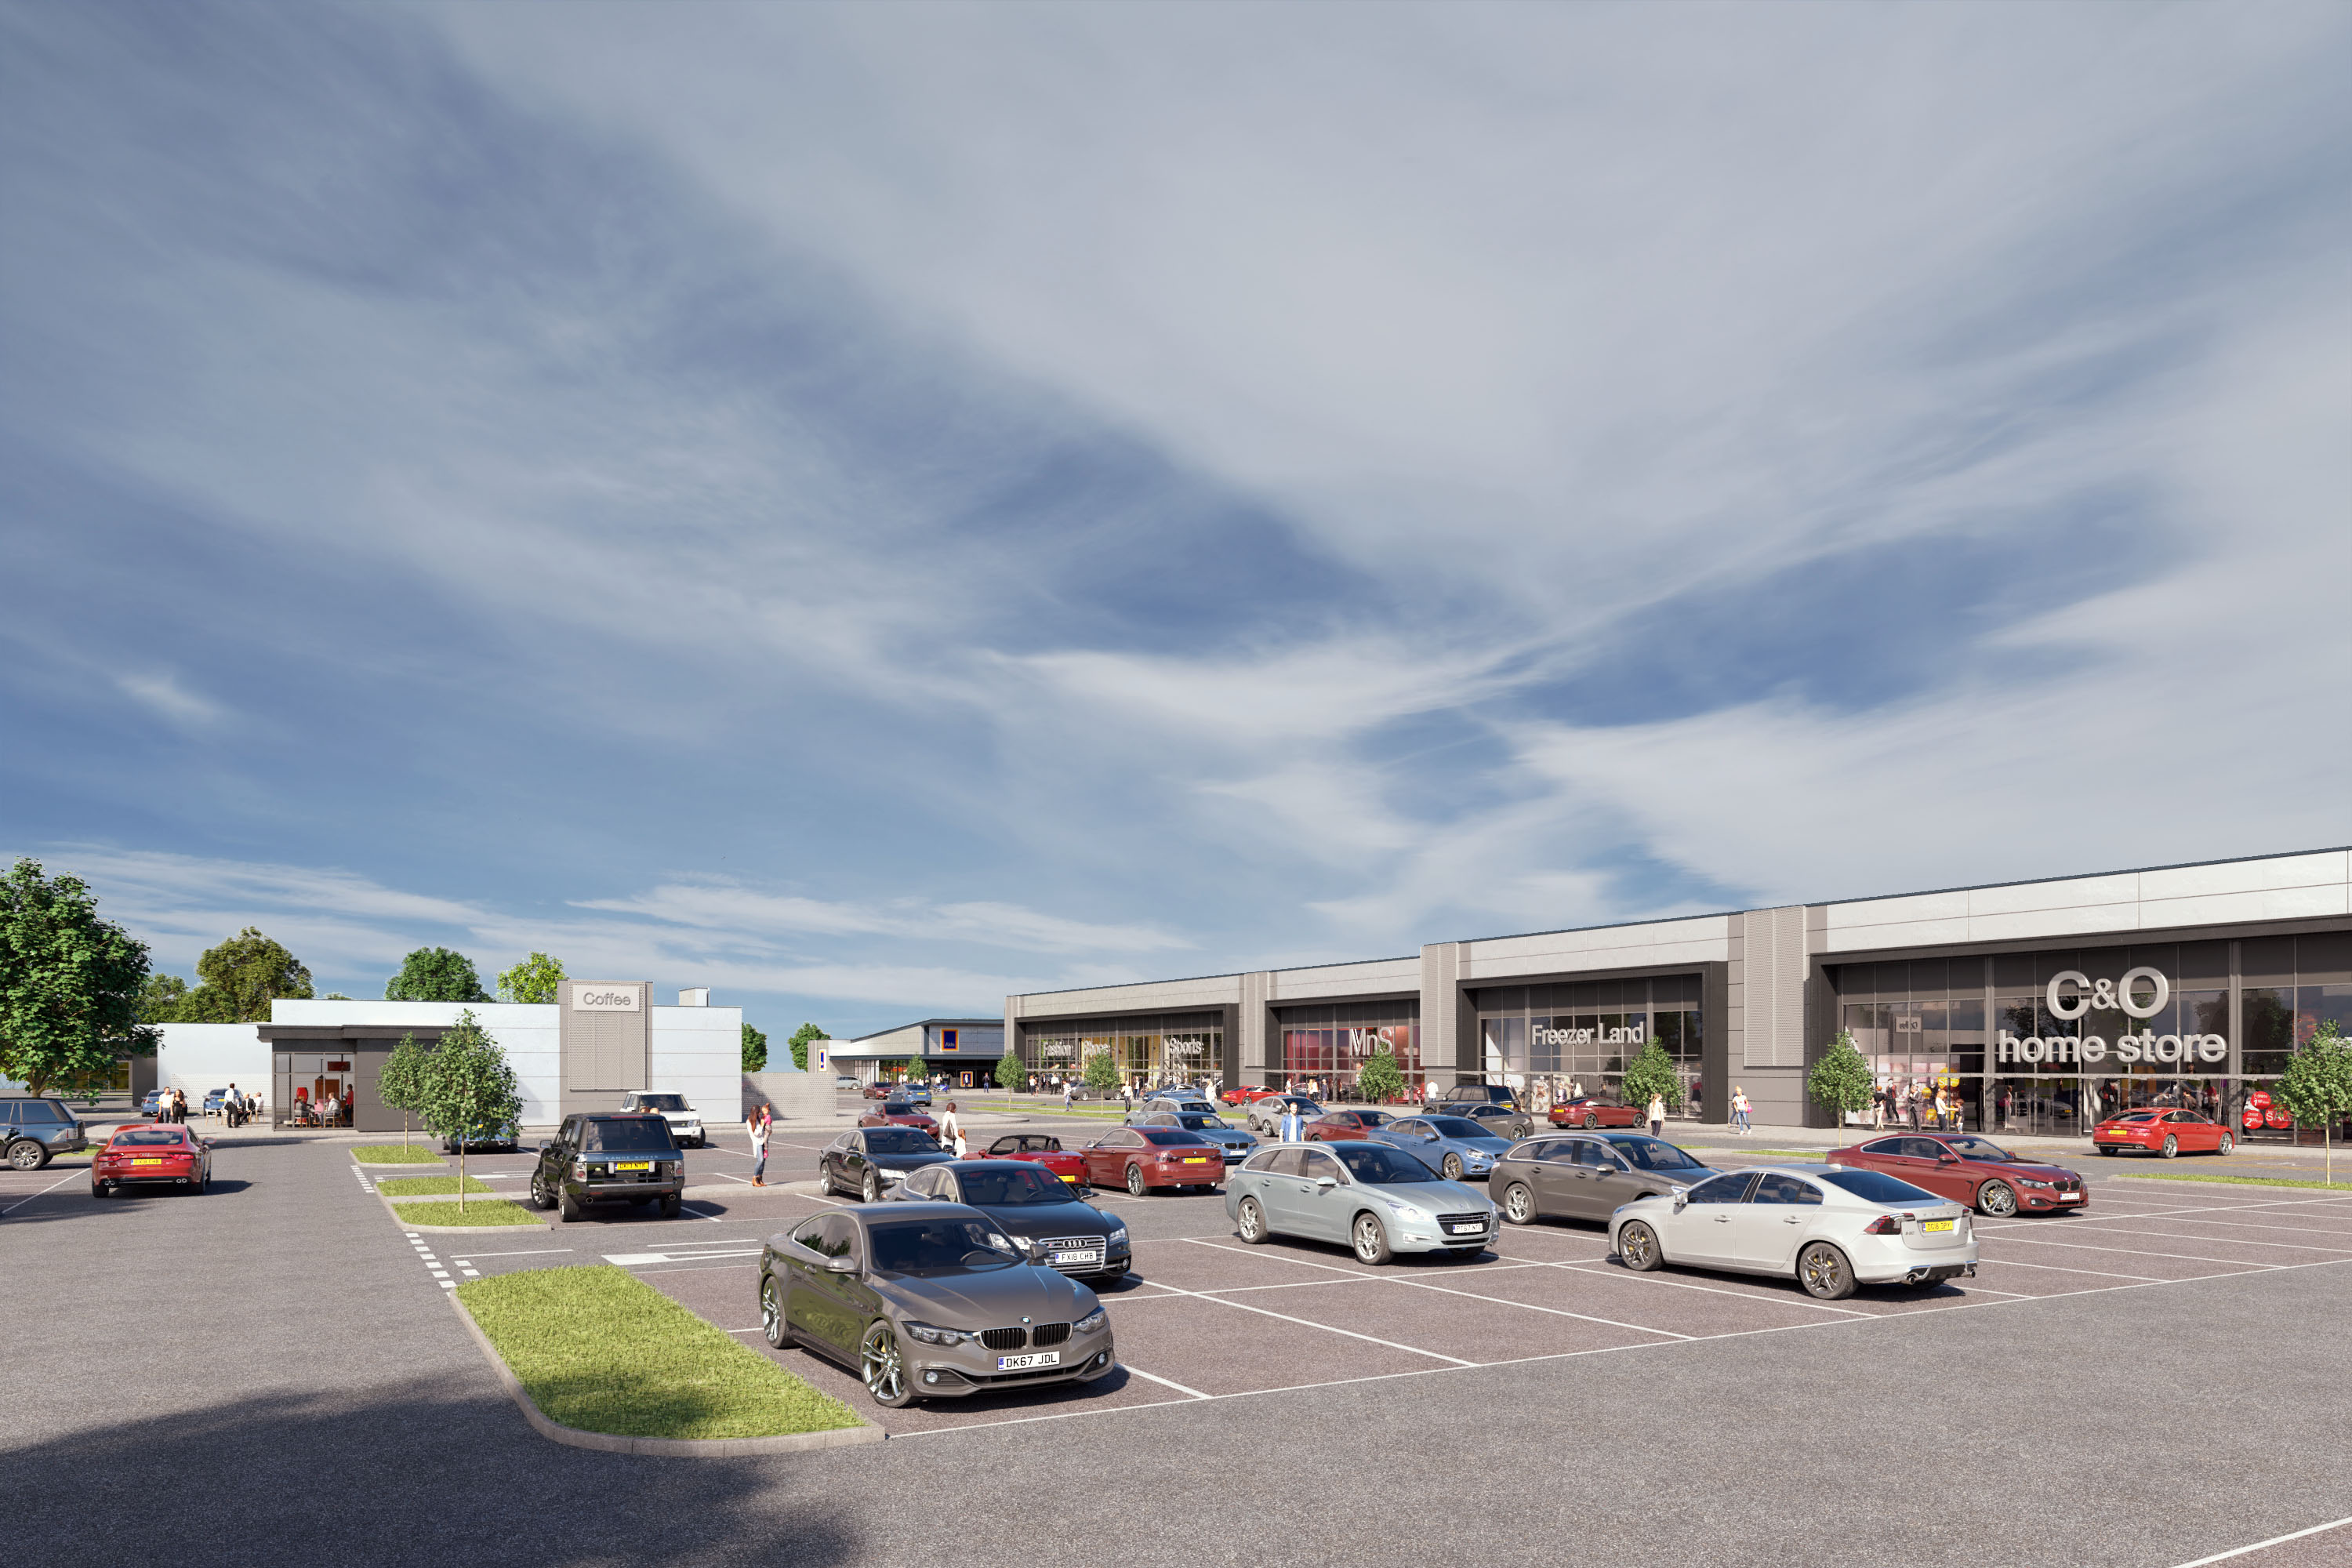 An artist's impression of the retail park planned for Arbroath.